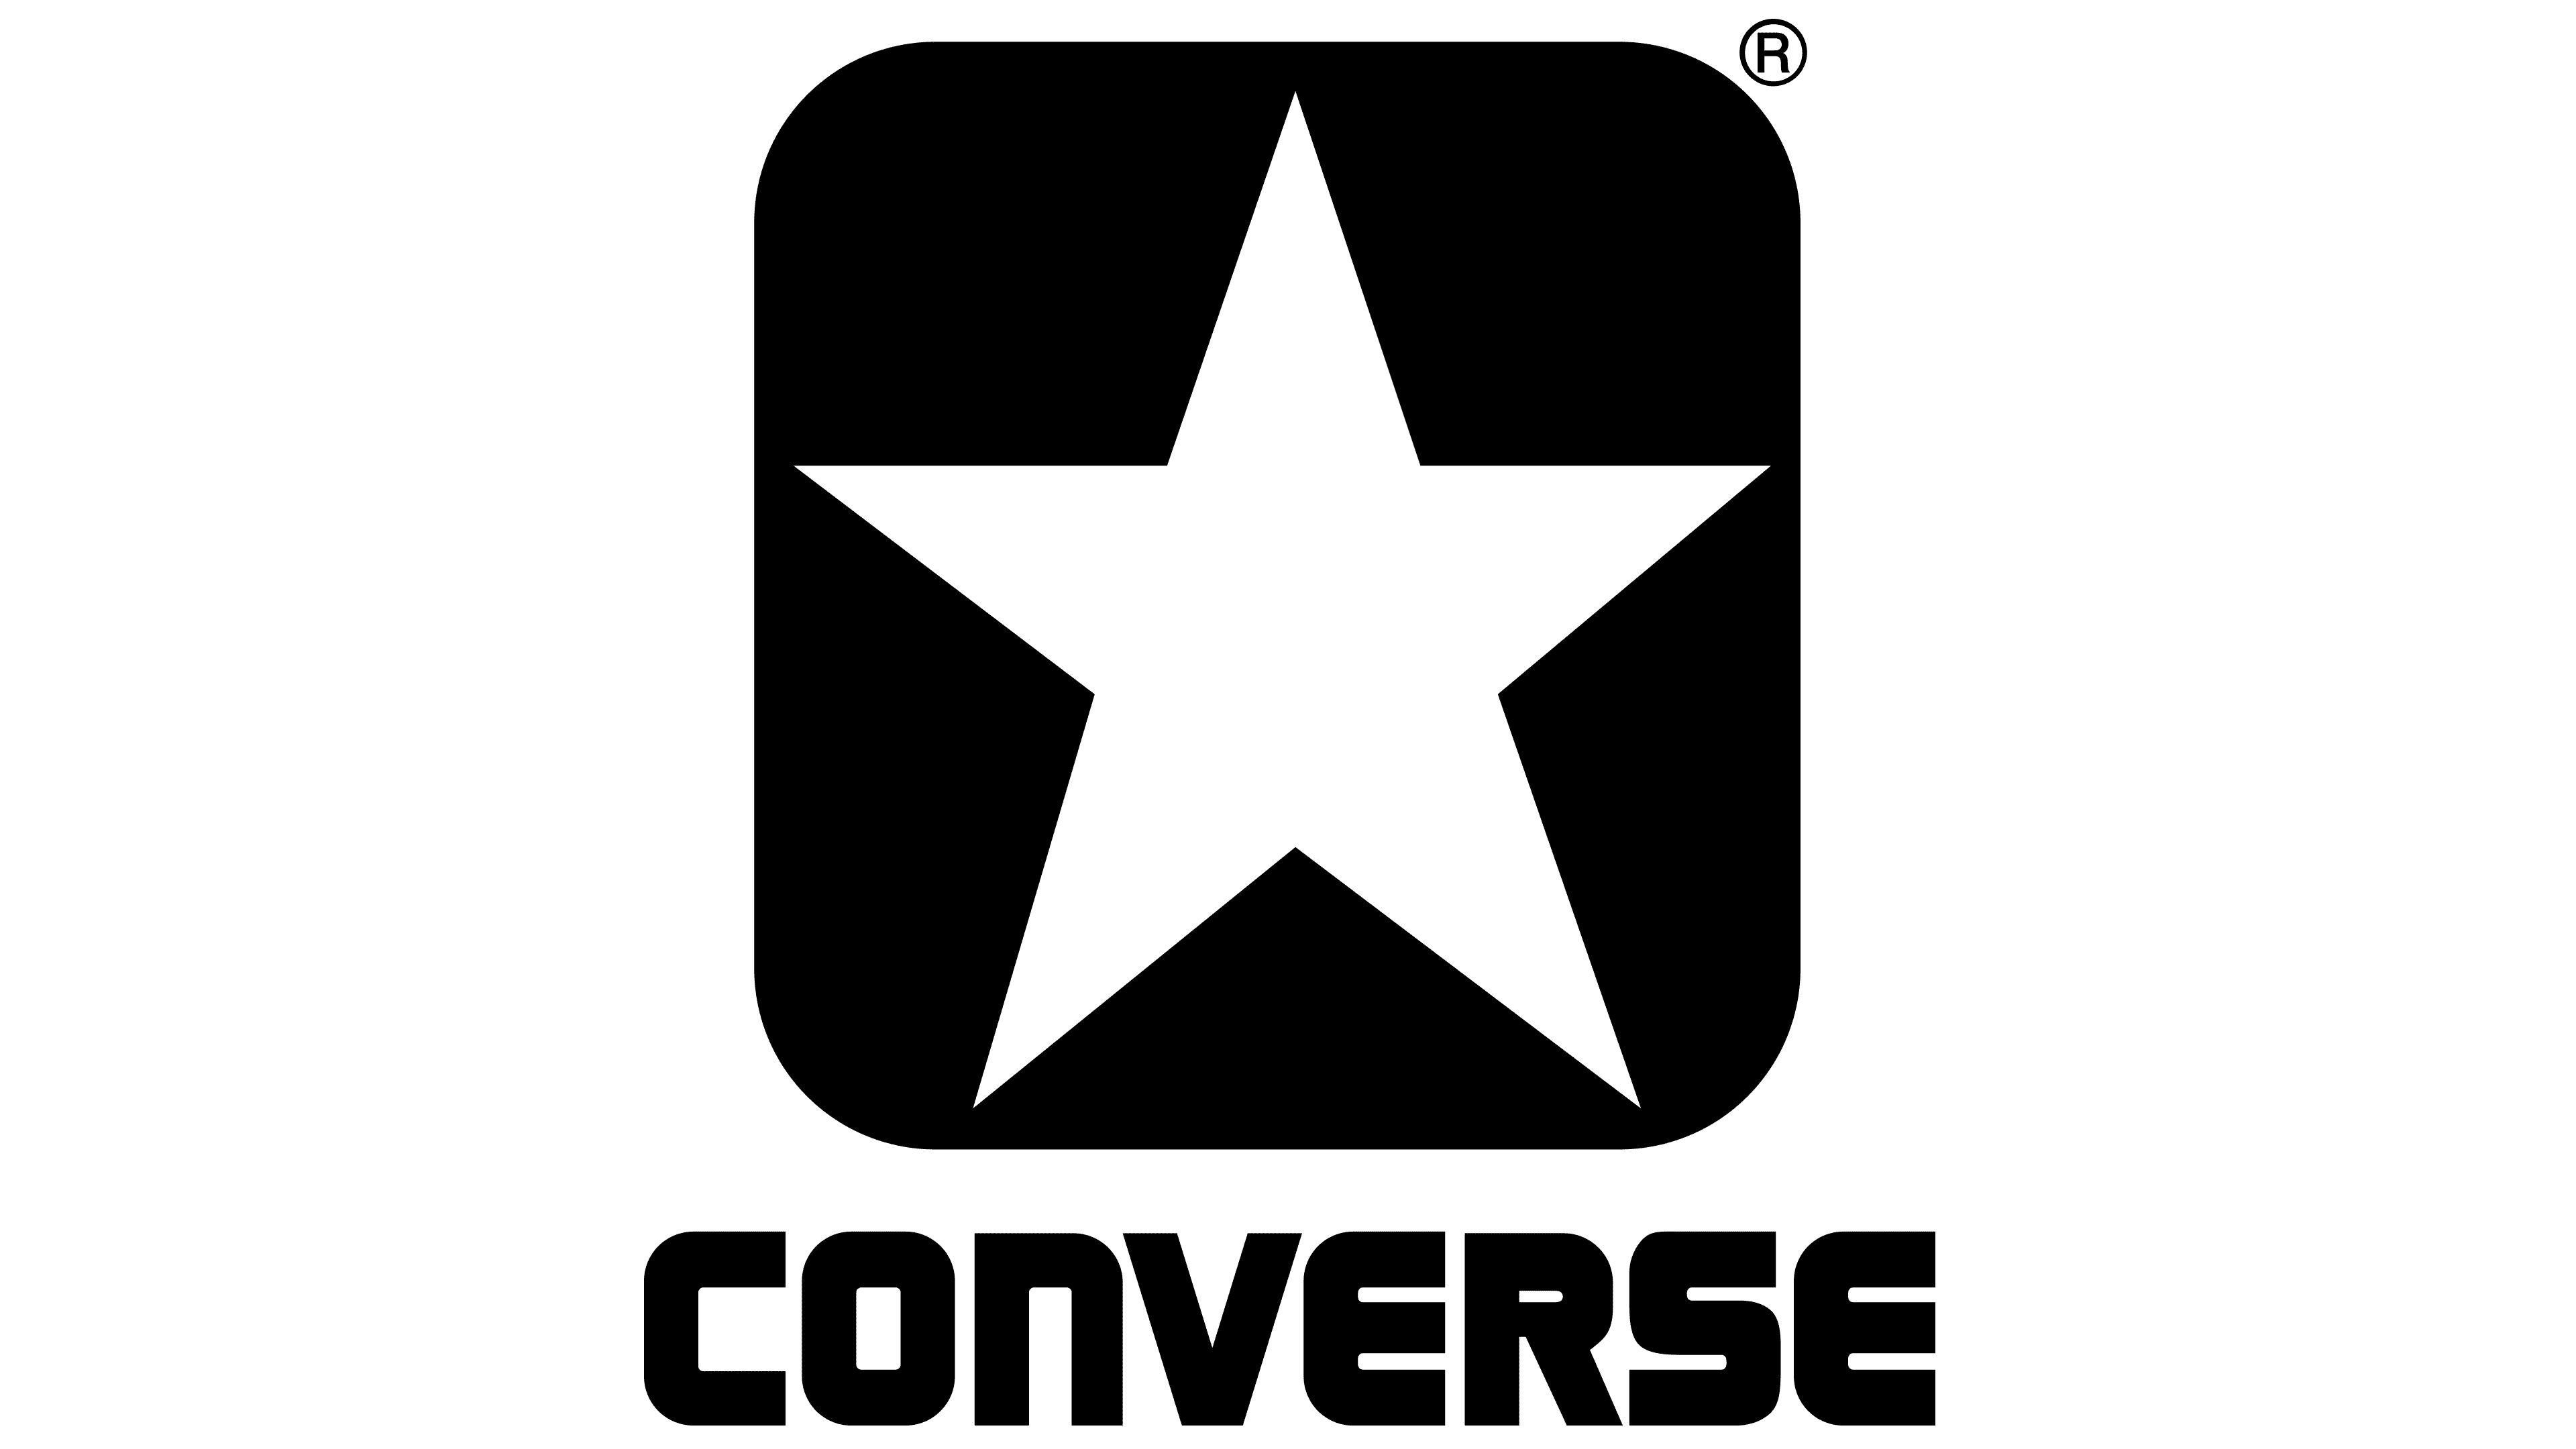 Converse Logos Over The Years | atelier-yuwa.ciao.jp